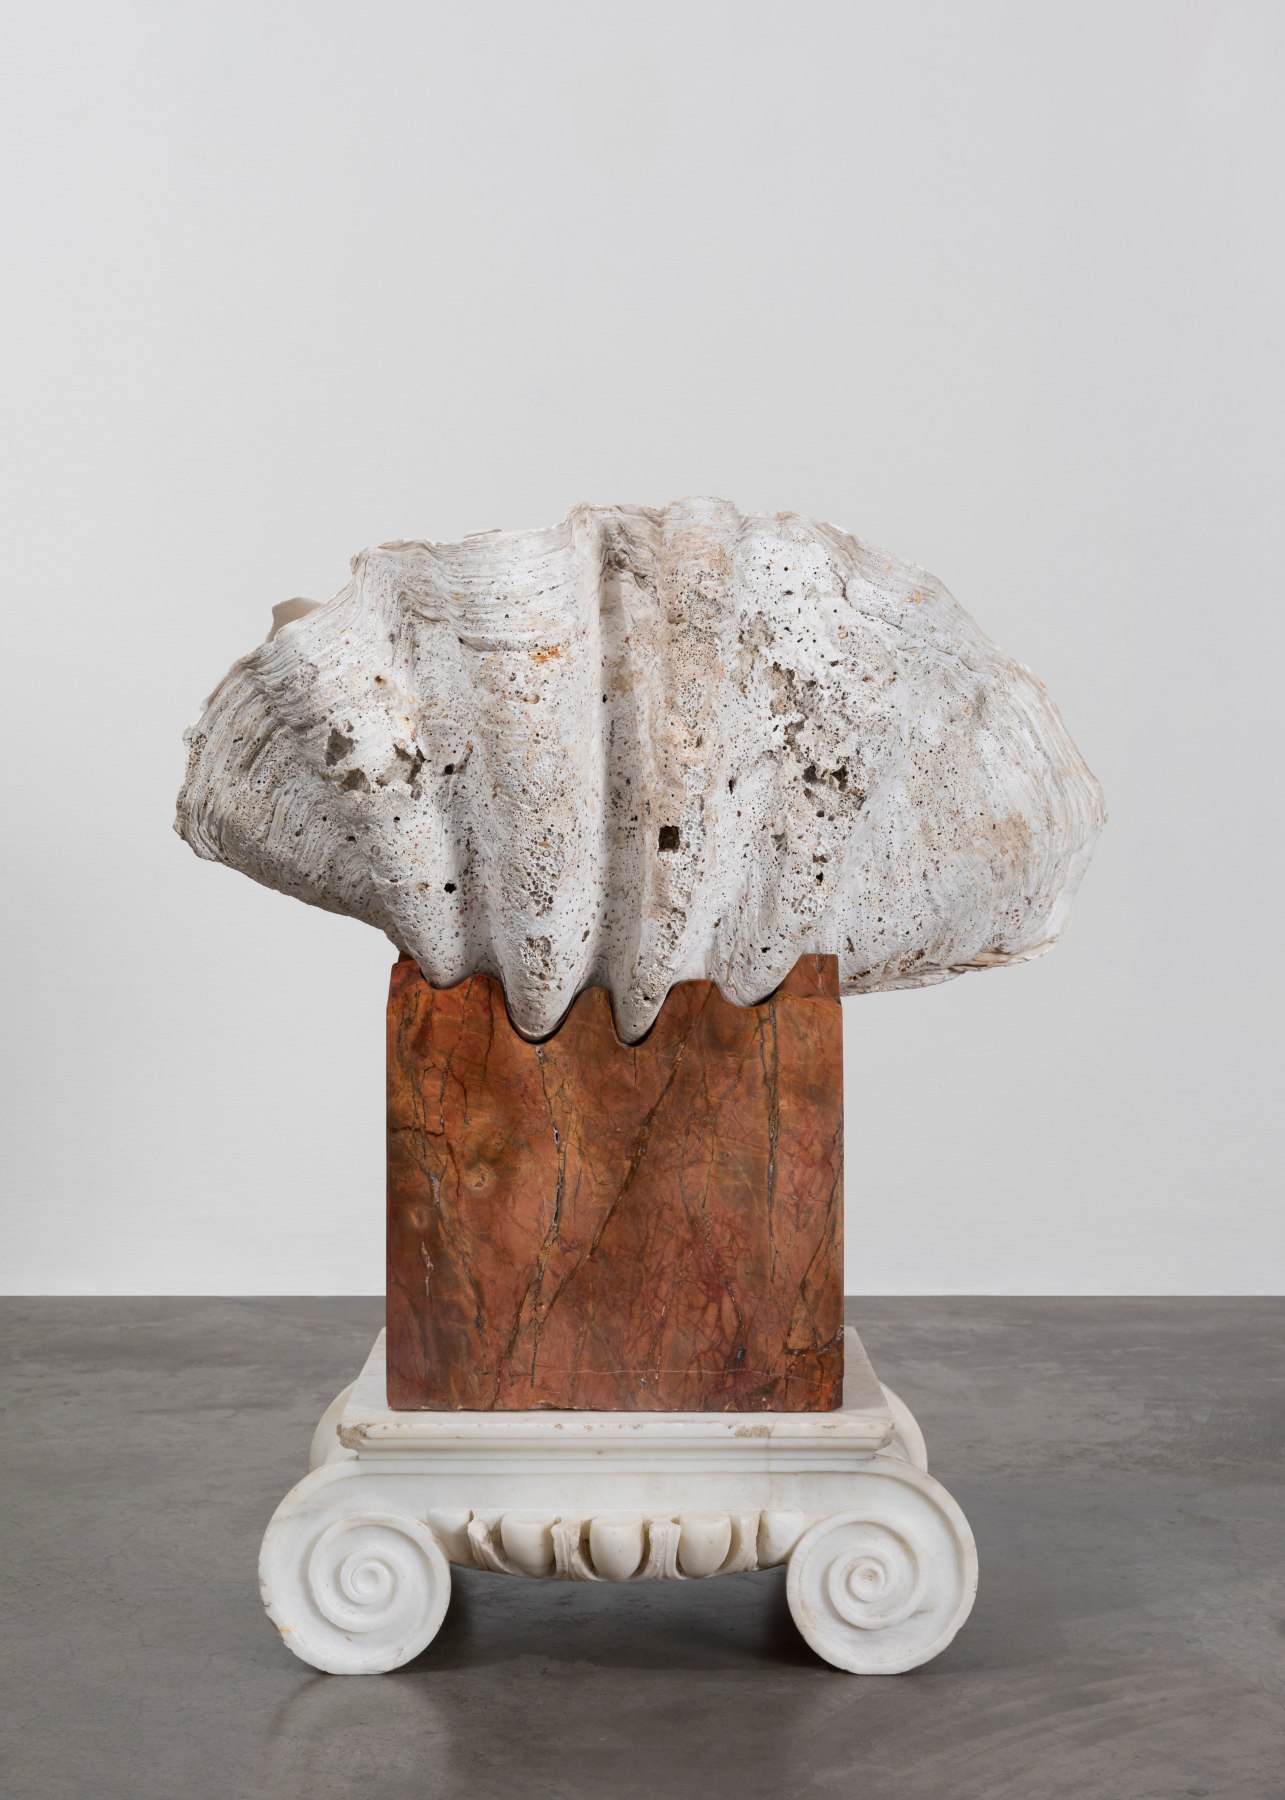 Dorothy Cross
Clam, 2023
antique clam shell, Damascus rose marble, antique marble capital
77 x 65 x 41 cm / 30.3 x 25.6 x 16.1 in